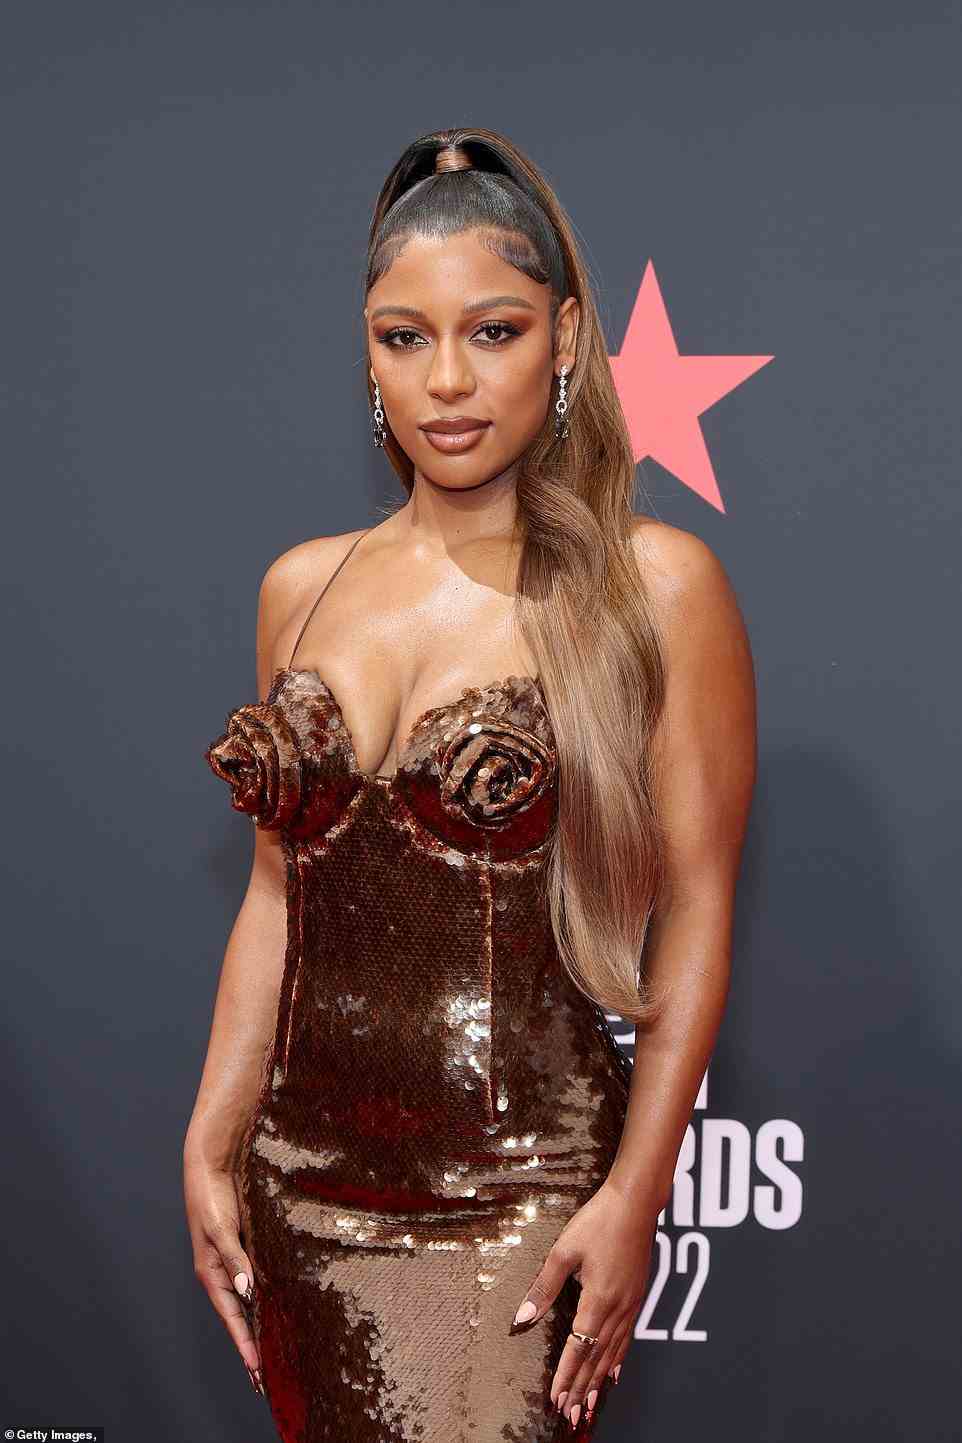 Madonna inspired? Victoria Monét sizzled in a brown sequin Madonna inspired gown